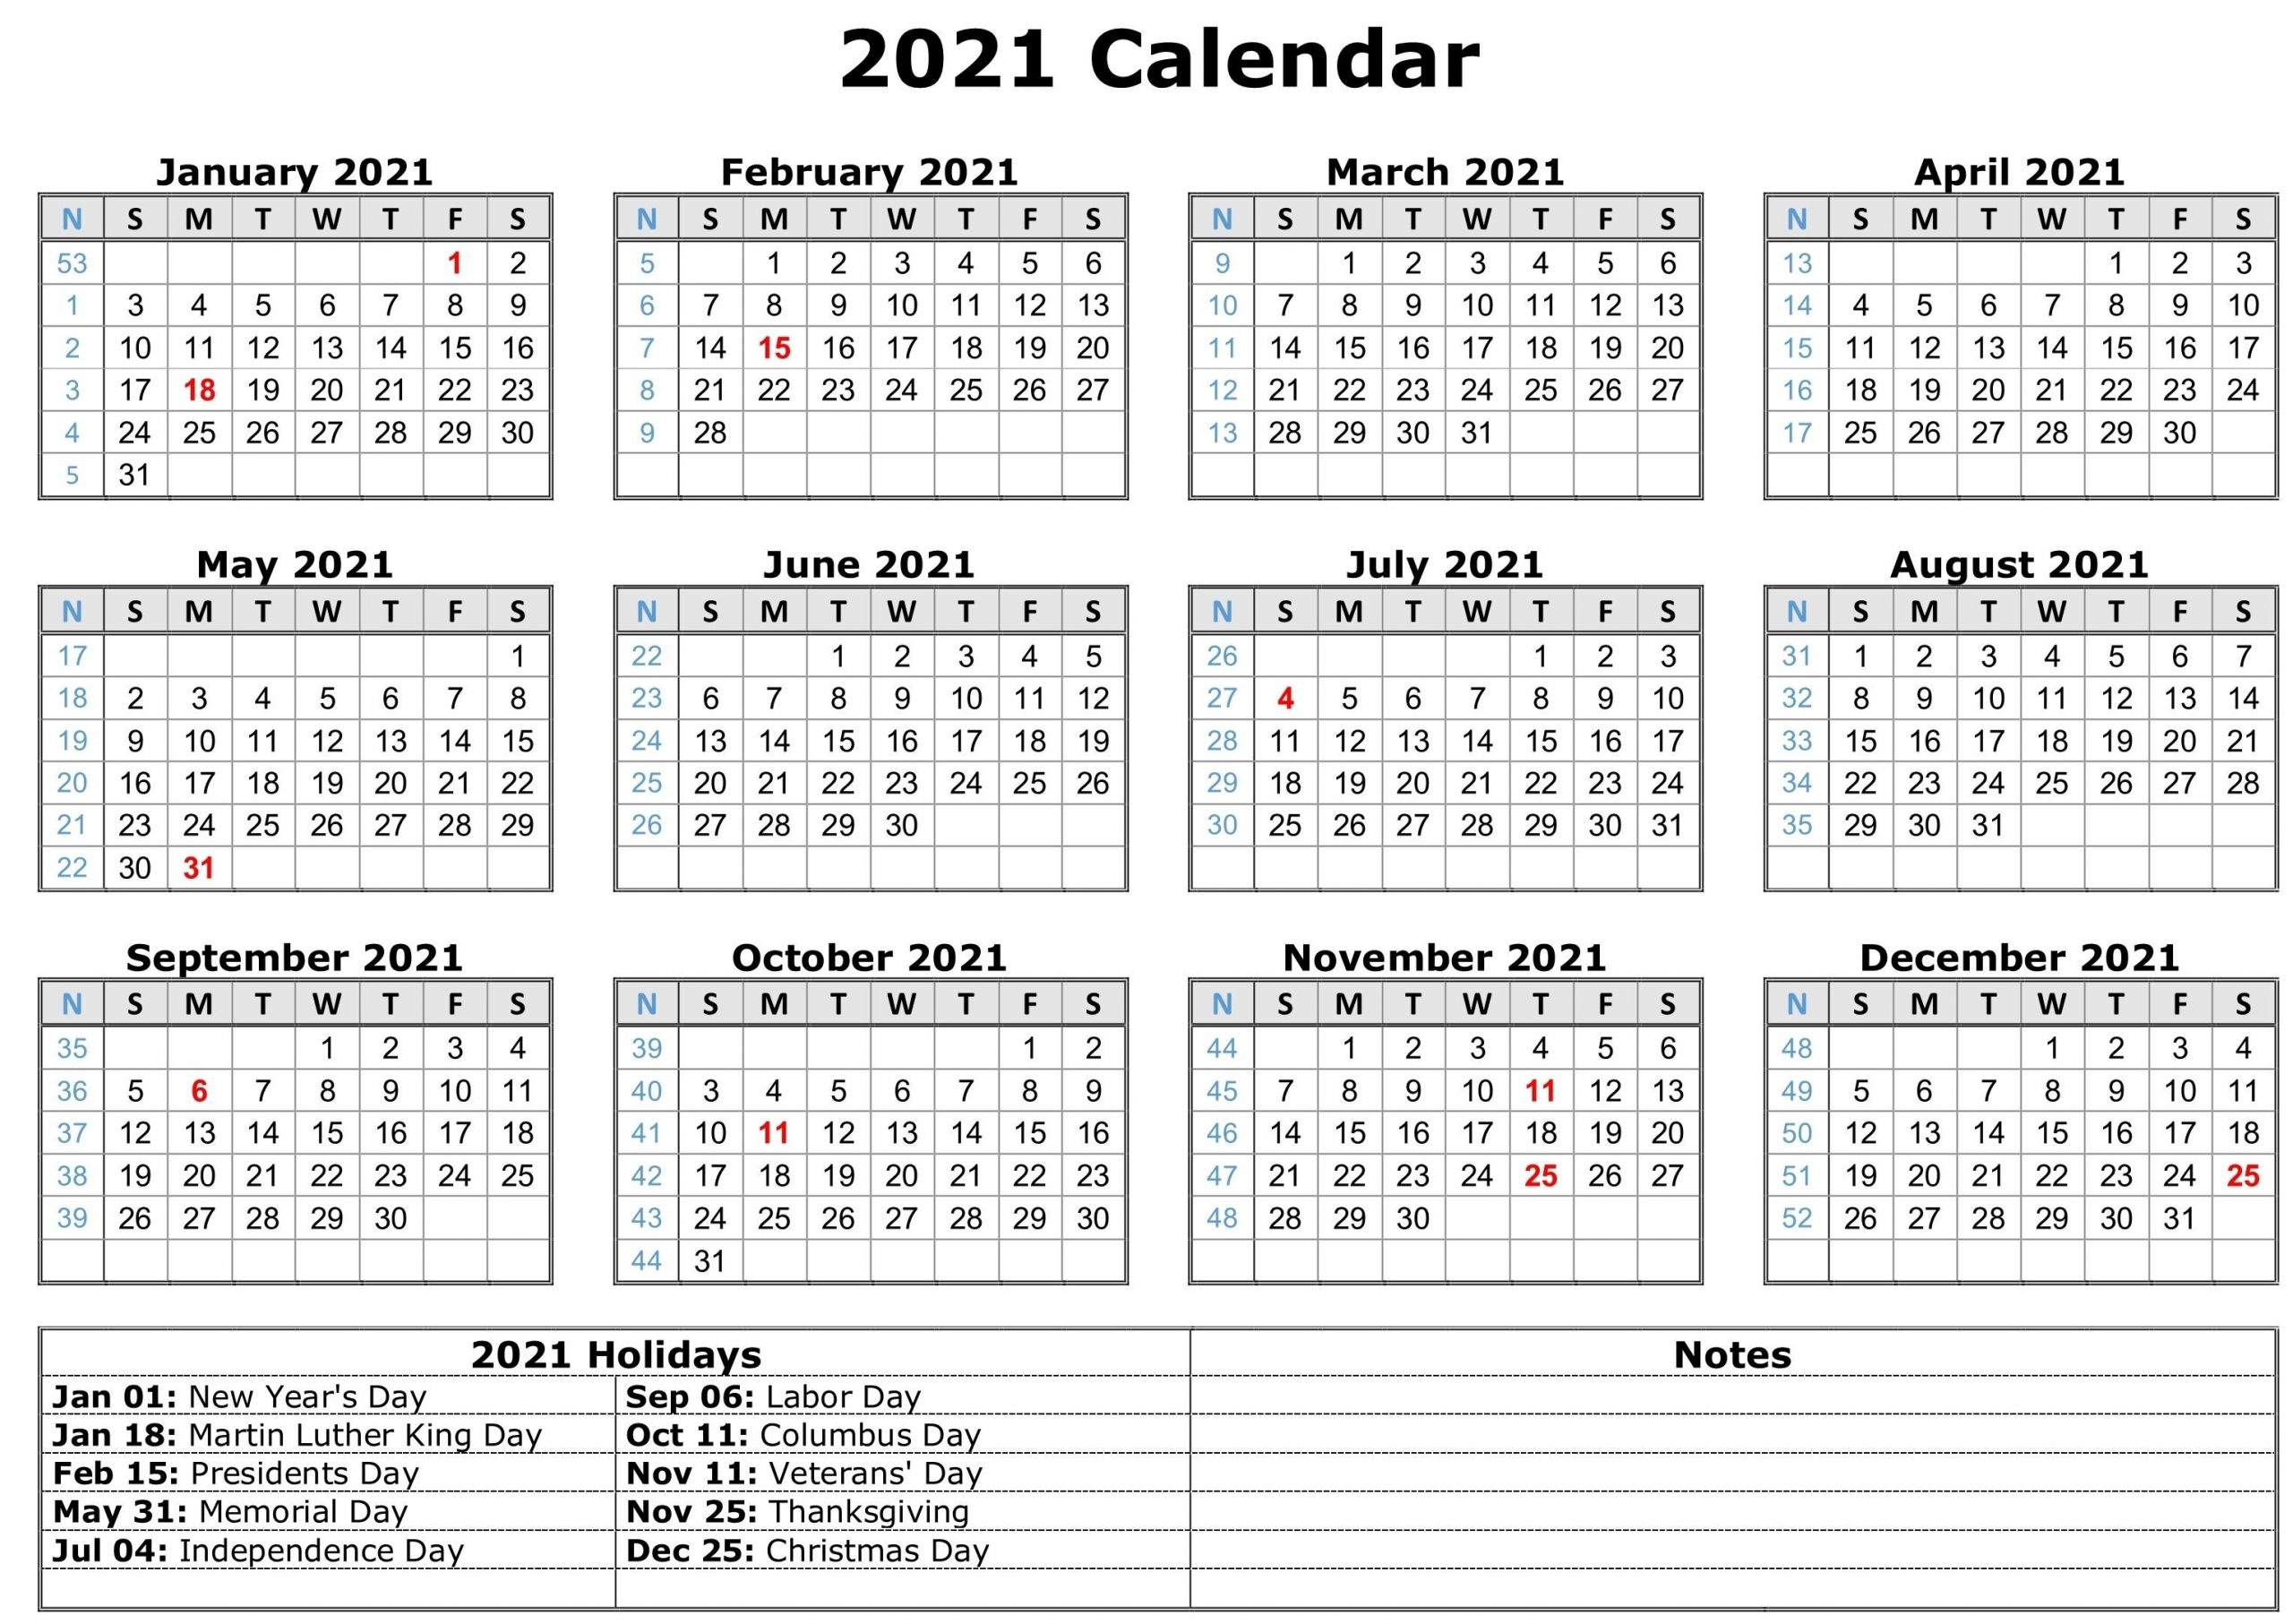 2021 Calendar With Holidays | Free Calendar Template-Print Free 2021 Calendars Without Downloading